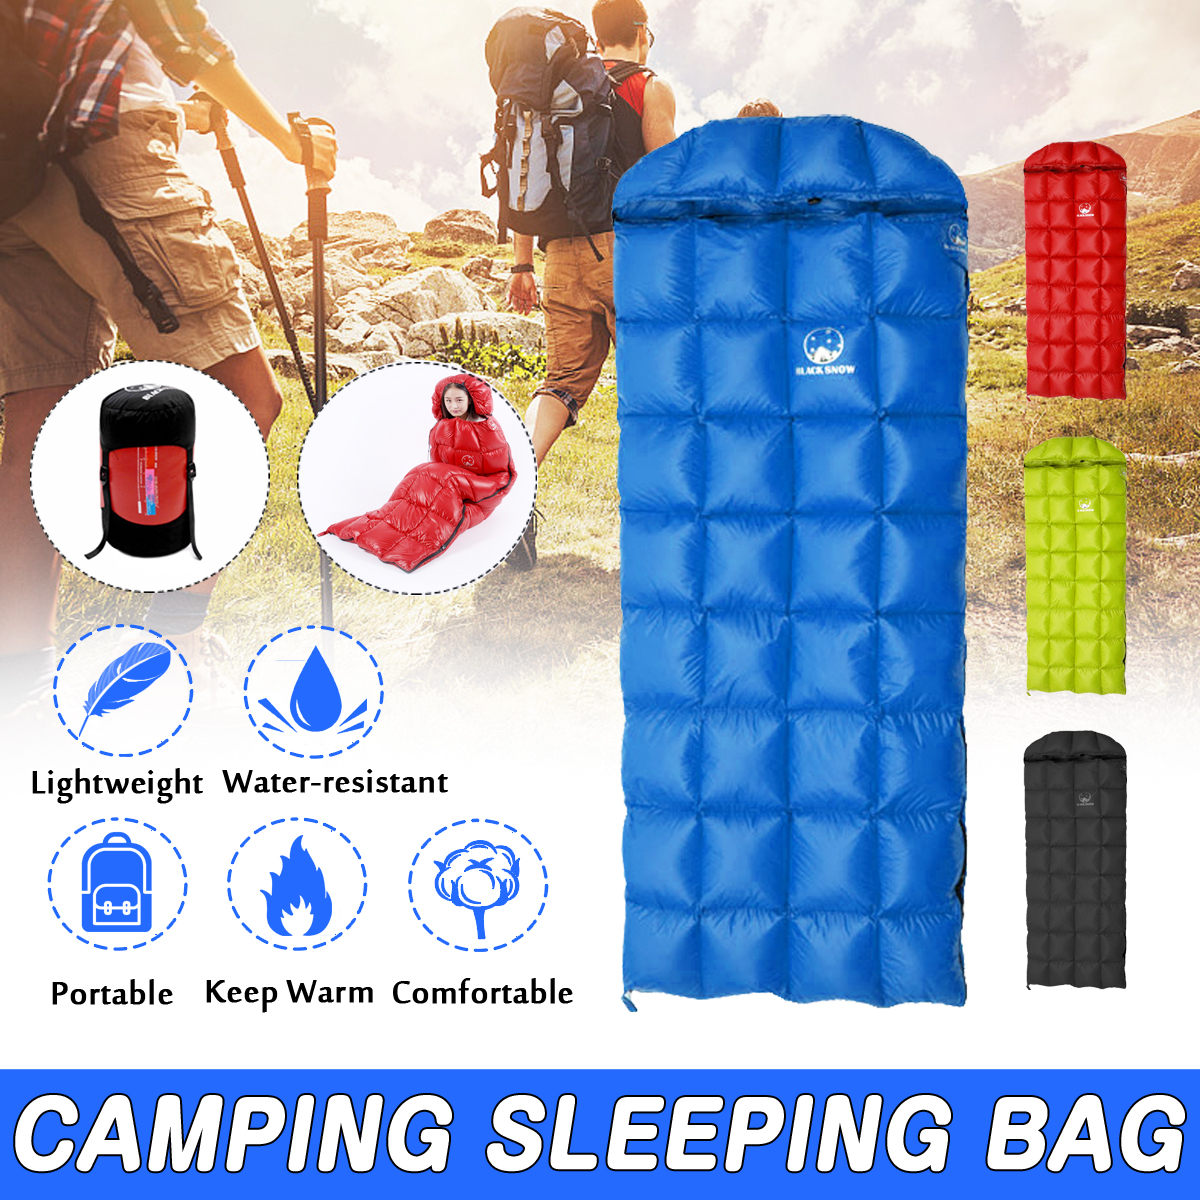 Outdoor-Camping-Traveling-Goose-Down-Sleeping-Bag-Lightweight-Adult-Backpacking-Compression-Sleeping-1544499-1